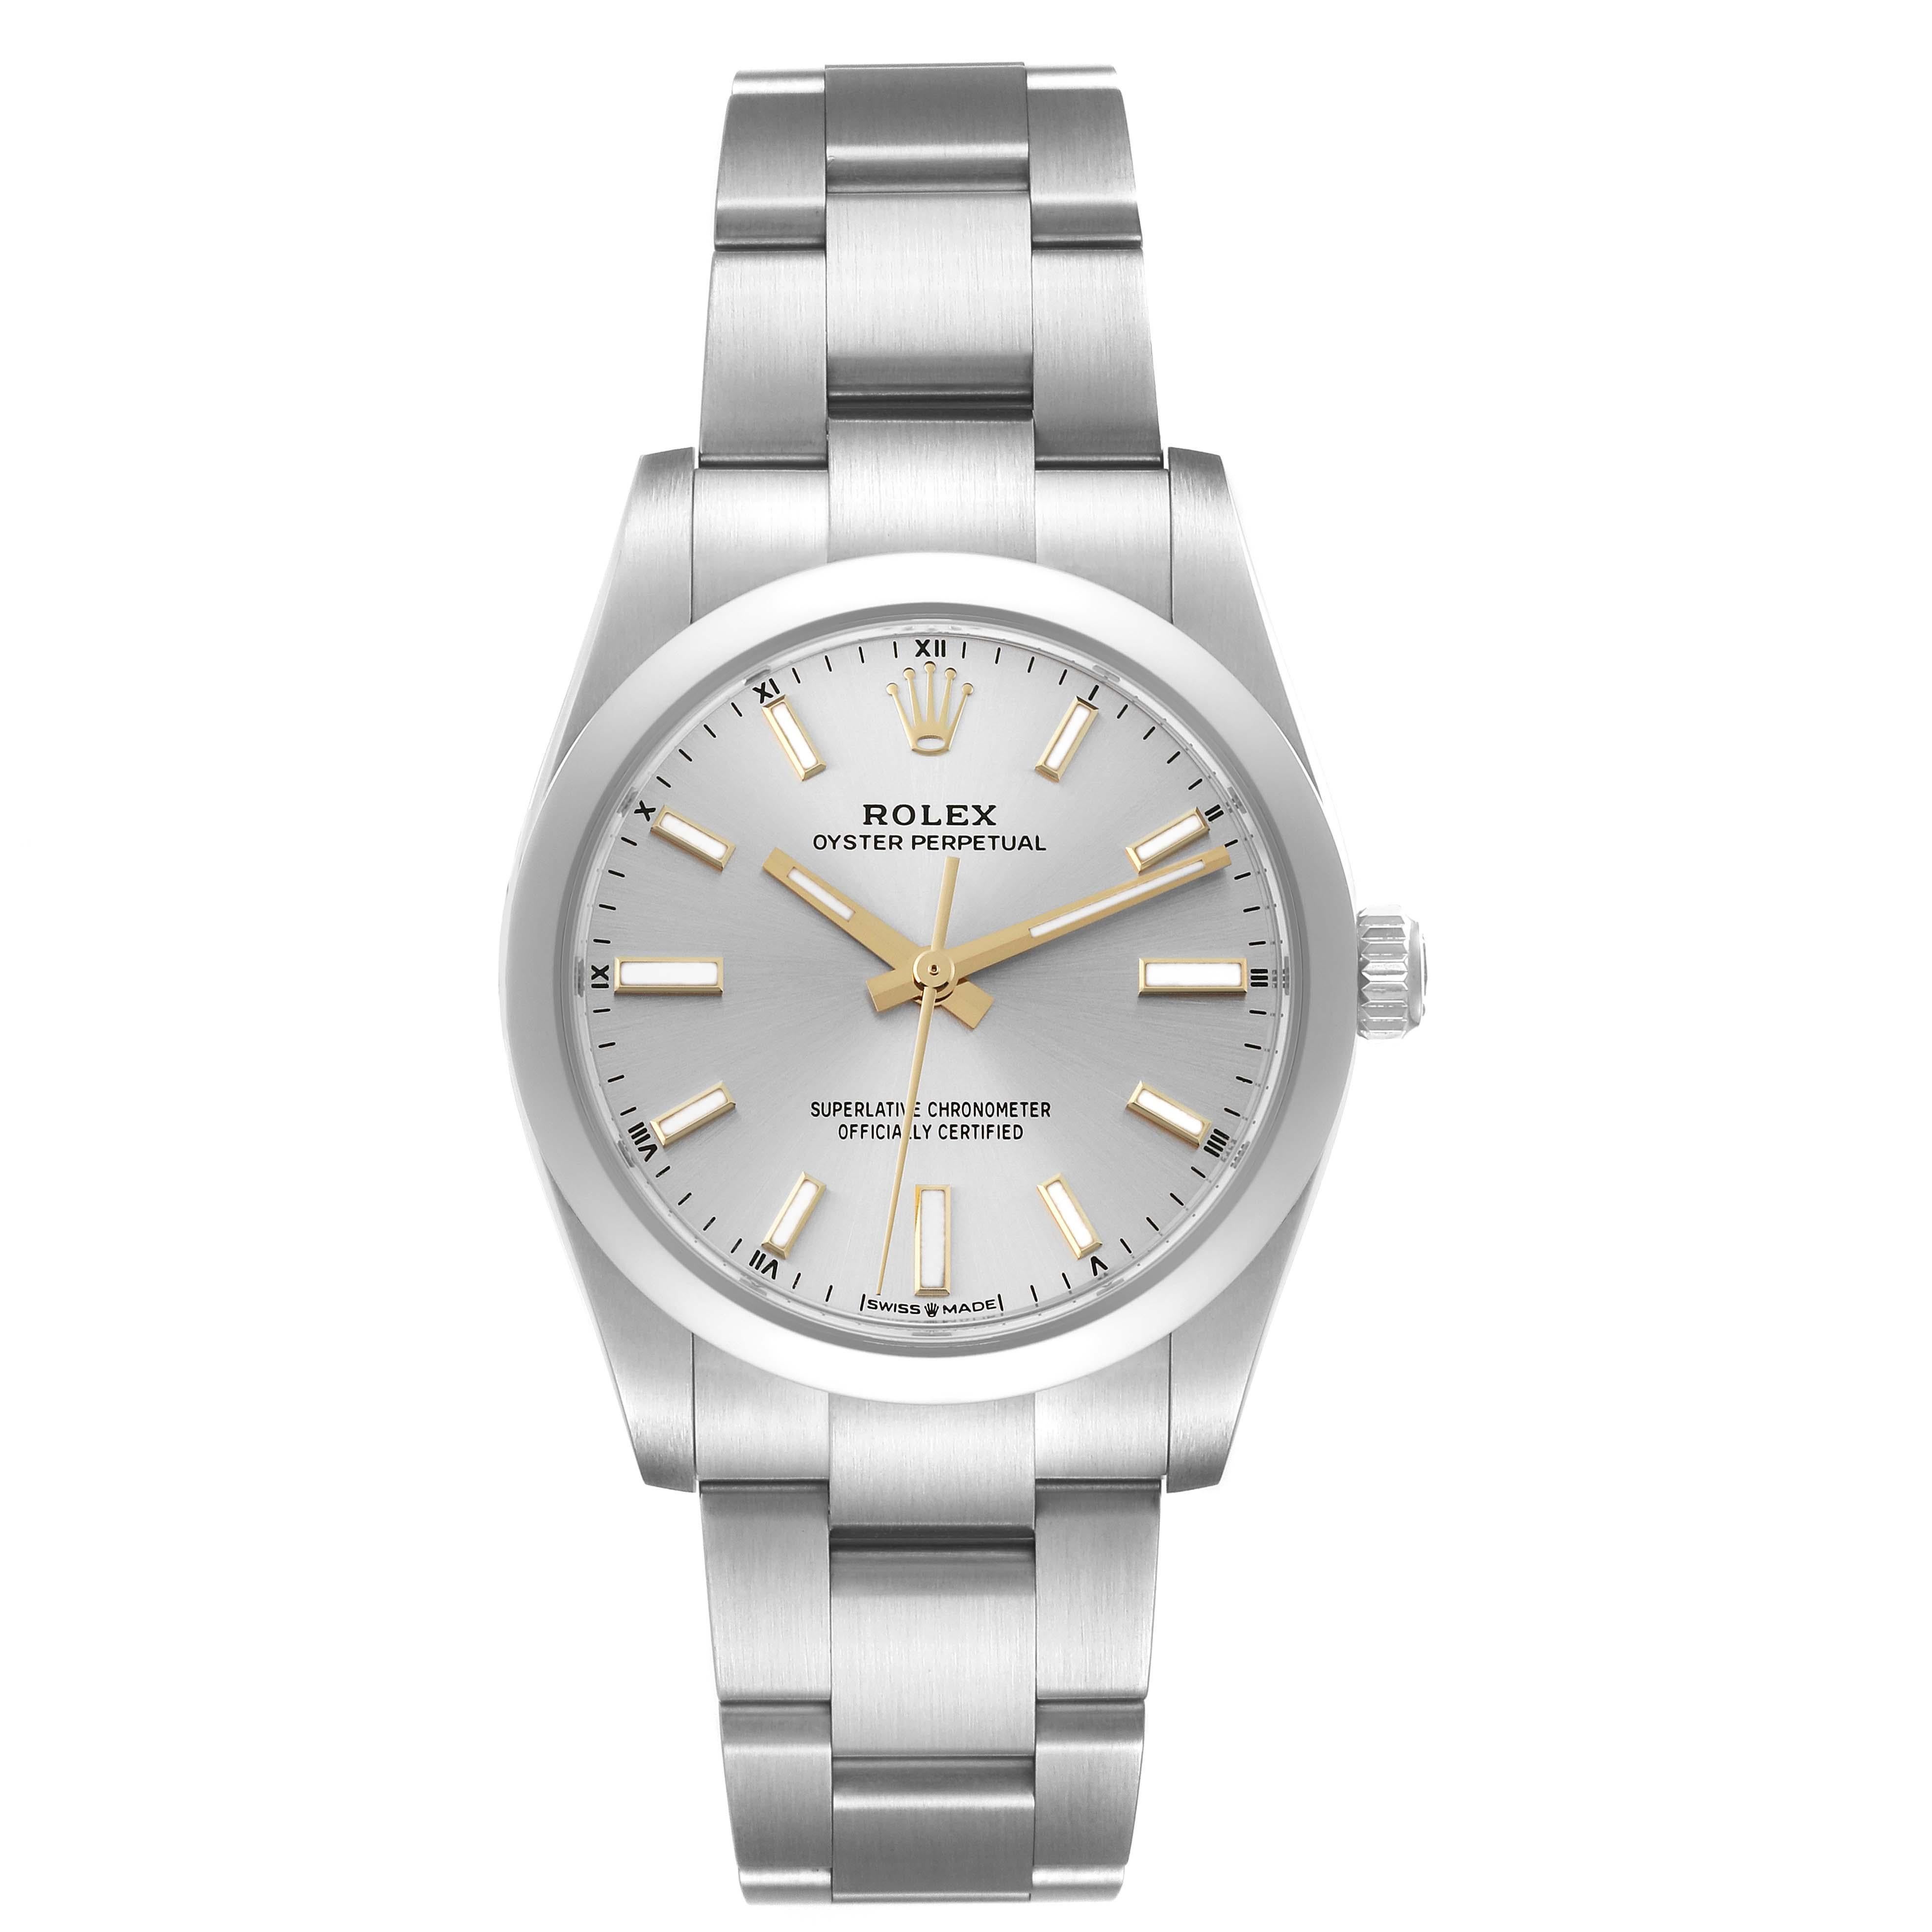 Rolex Oyster Perpetual 34mm Silver Dial Steel Mens Watch 124200 Box Card. Officially certified chronometer automatic self-winding movement. Stainless steel case 34 mm in diameter. Rolex logo on a crown. Stainless steel smooth domed bezel. Scratch